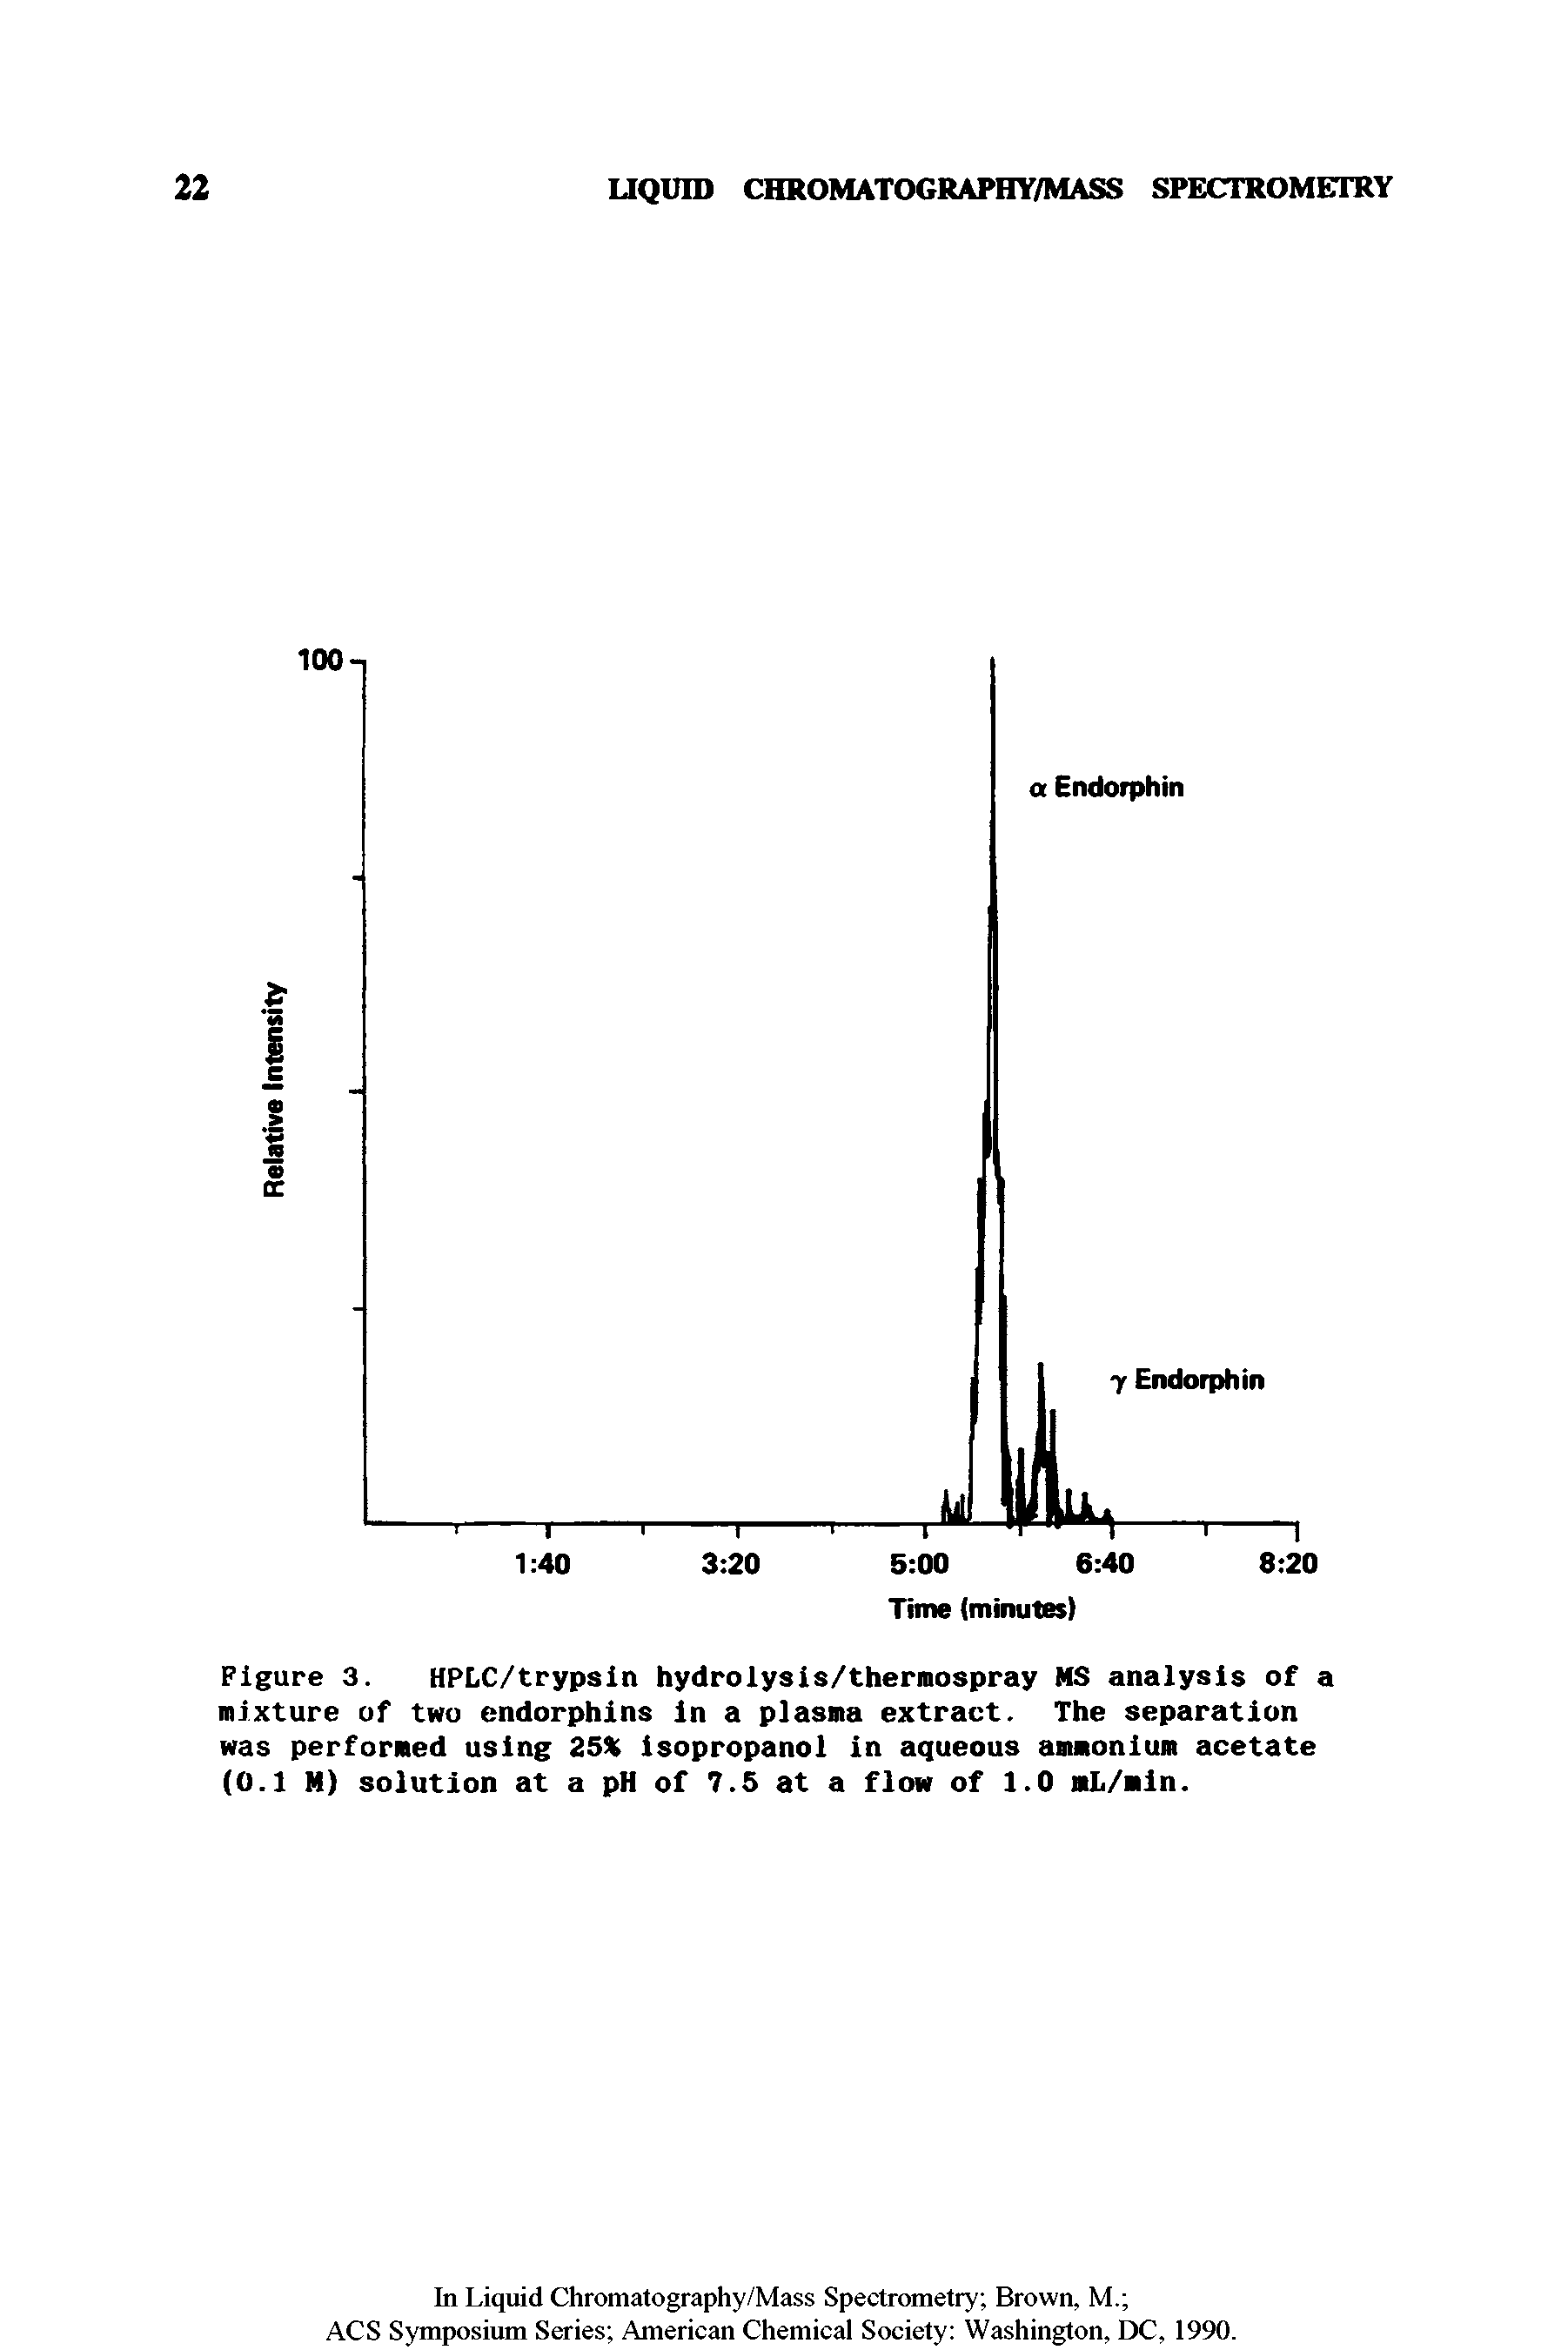 Figure 3. HPLC/trypsin hydrolysis/thermospray MS analysis of a mixture of two endorphins in a plasma extract. The separation was performed using 25% isopropanol in aqueous ammonium acetate (0.1 H) solution at a pH of 7.5 at a flow of 1.0 mL/min.